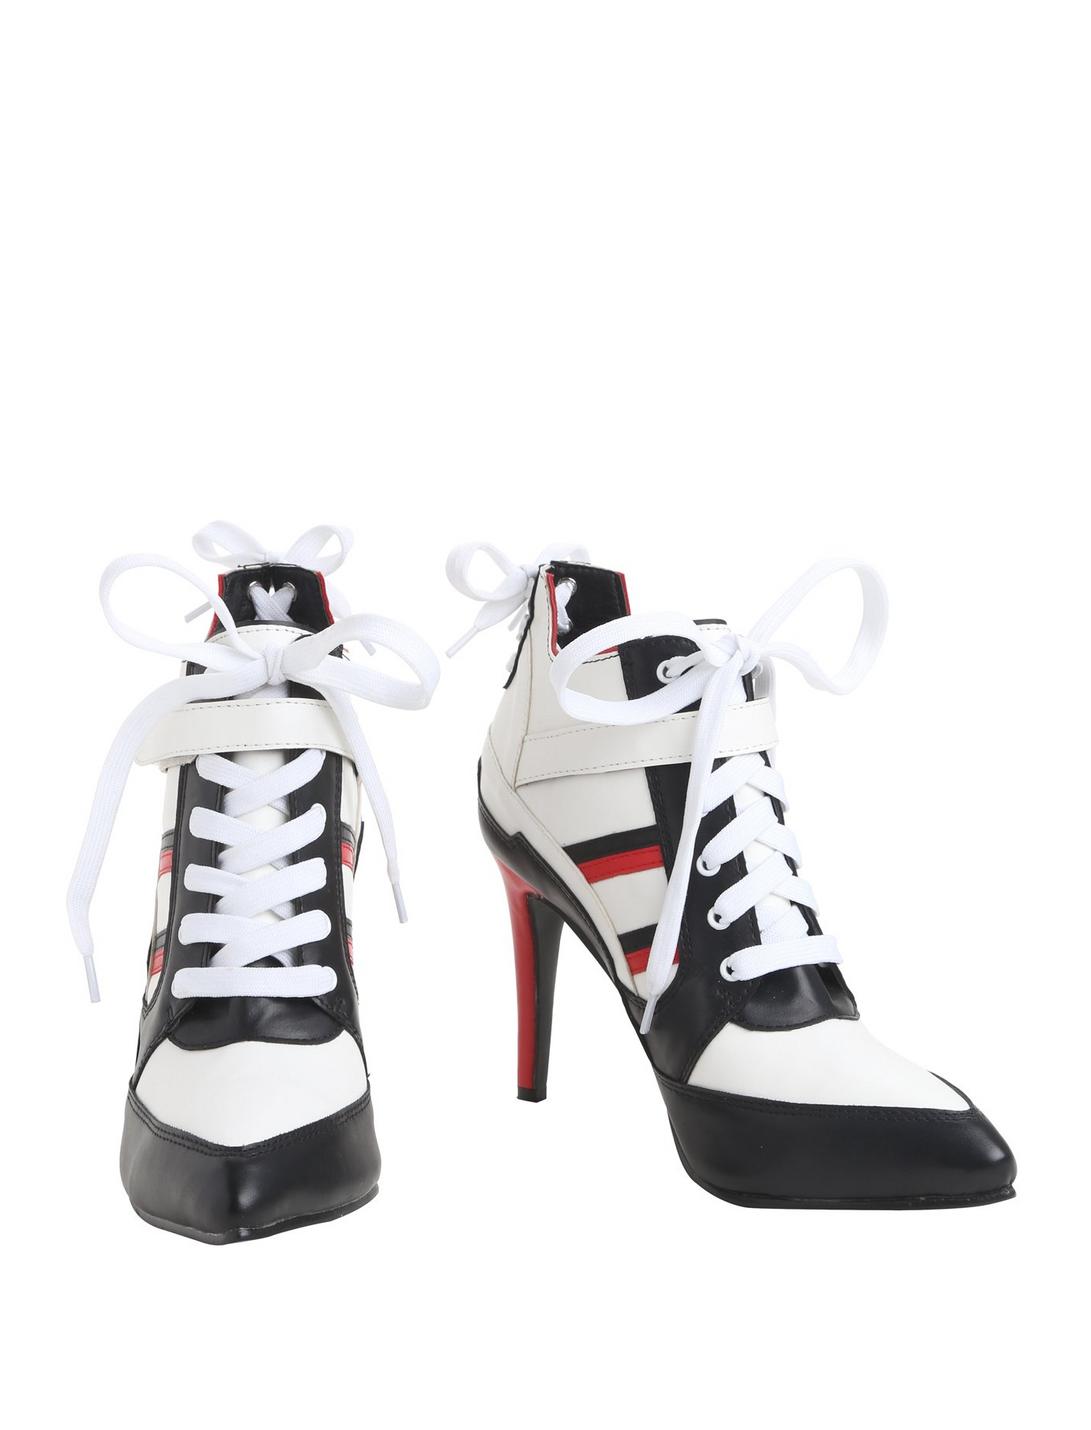 White Red & Black Striped Sneaker Booties, WHITE, hi-res